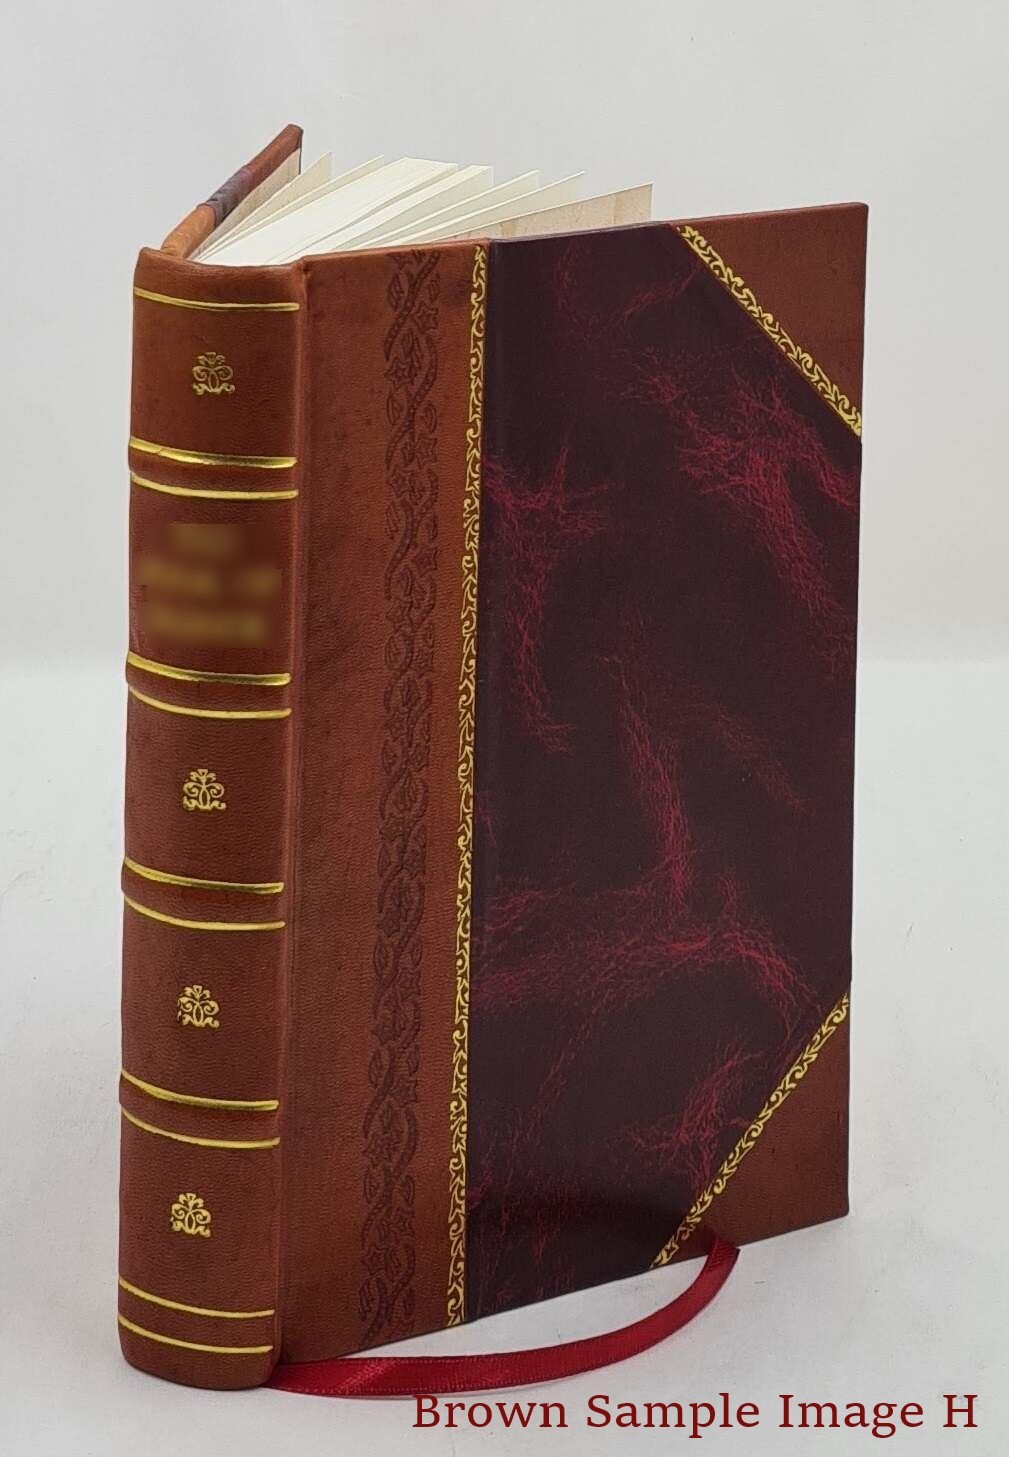 Primary image for A Study of History Vol-II 1934 [Leather Bound] by Arnold J. Toynbee